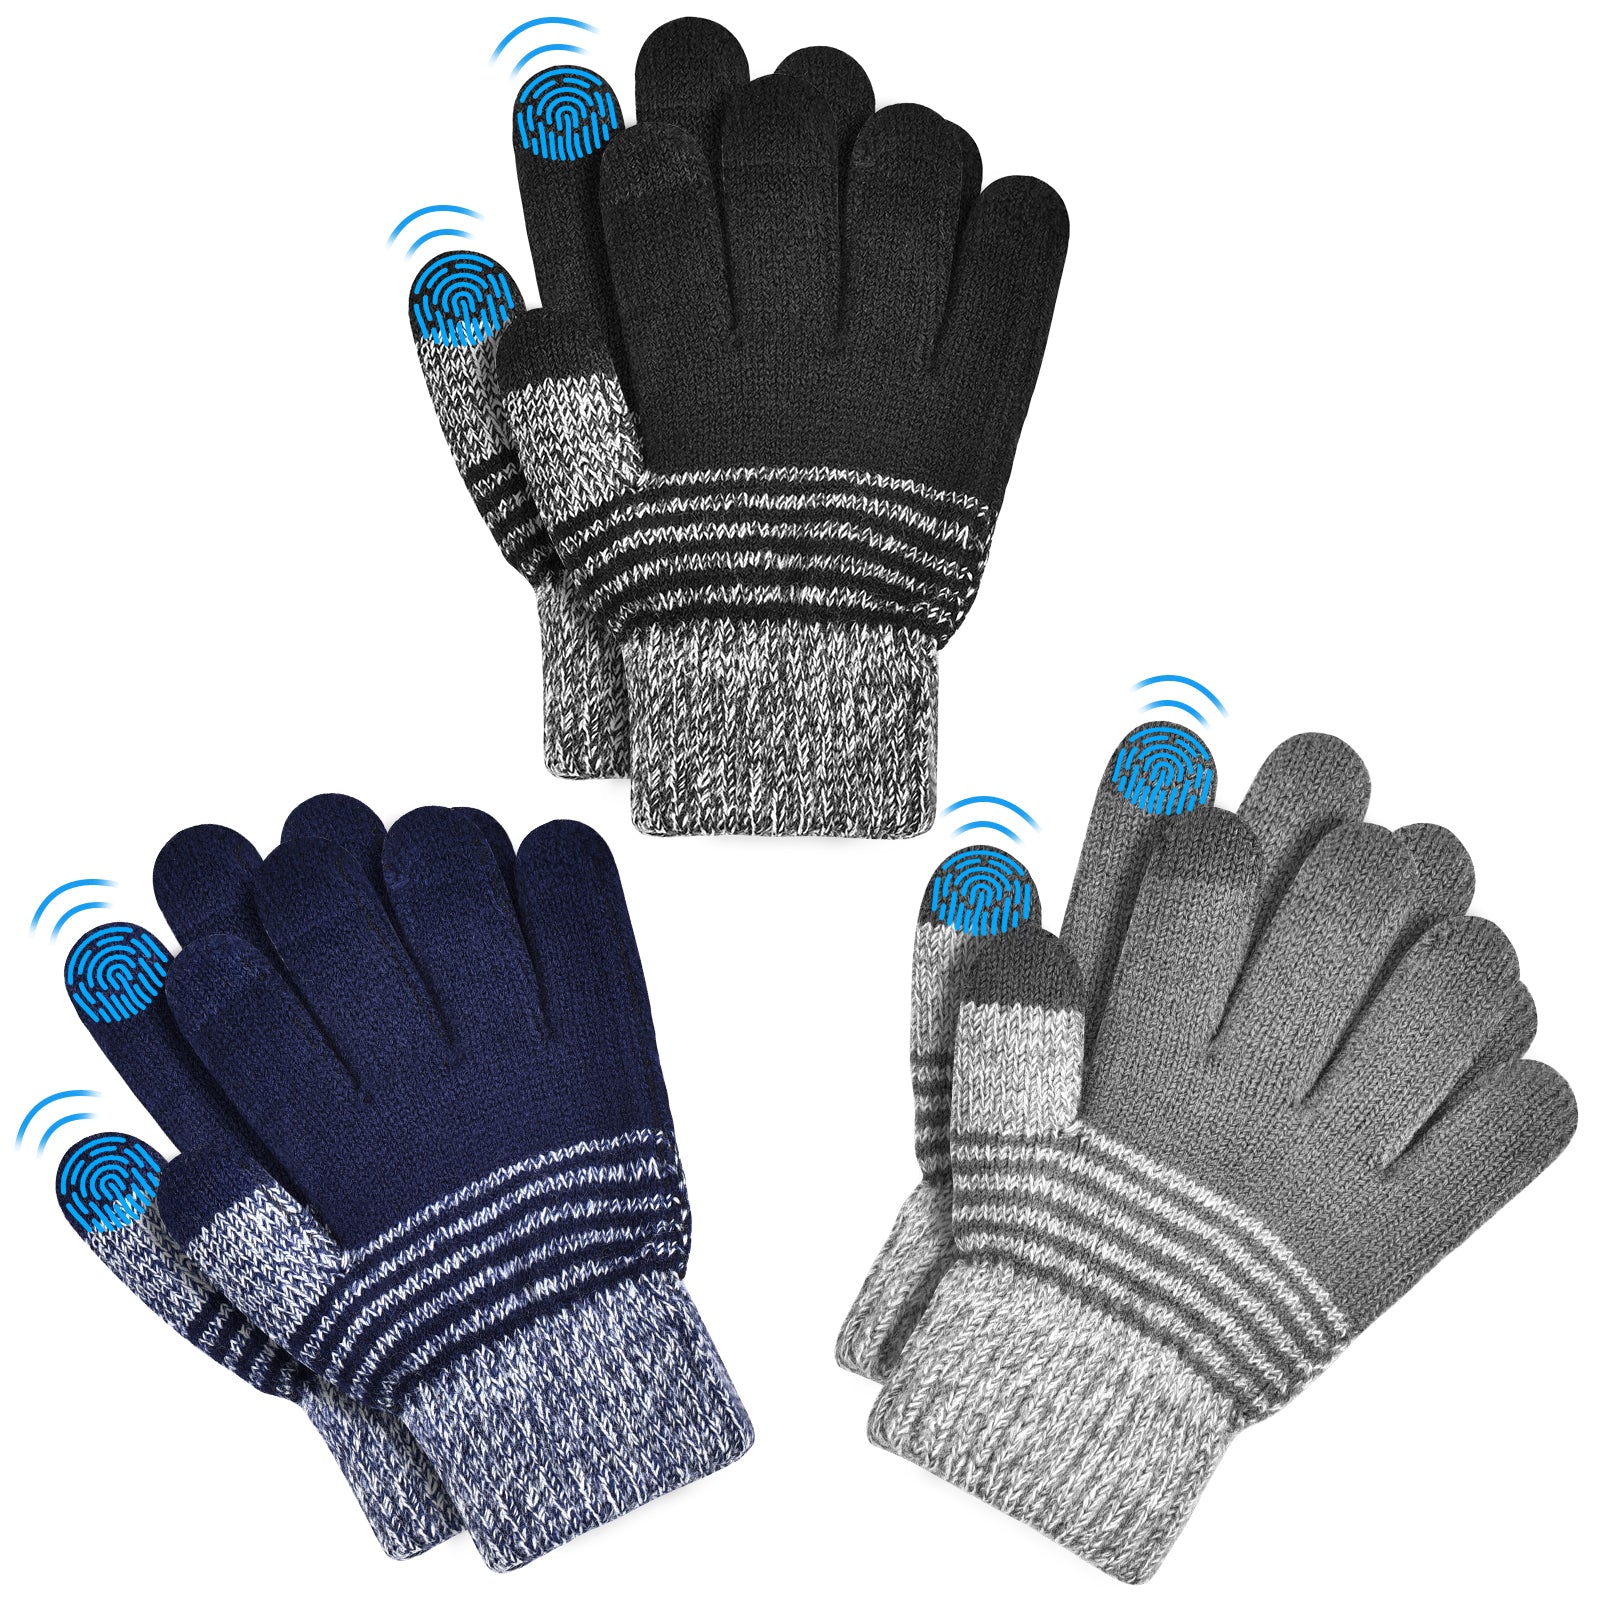 3 Pairs Kids Gloves for Winter Gloves for Boys Girls Touchscreen Gloves Sports Gloves for Kids Aged 6-8 Years Old - Black Gray & Navy